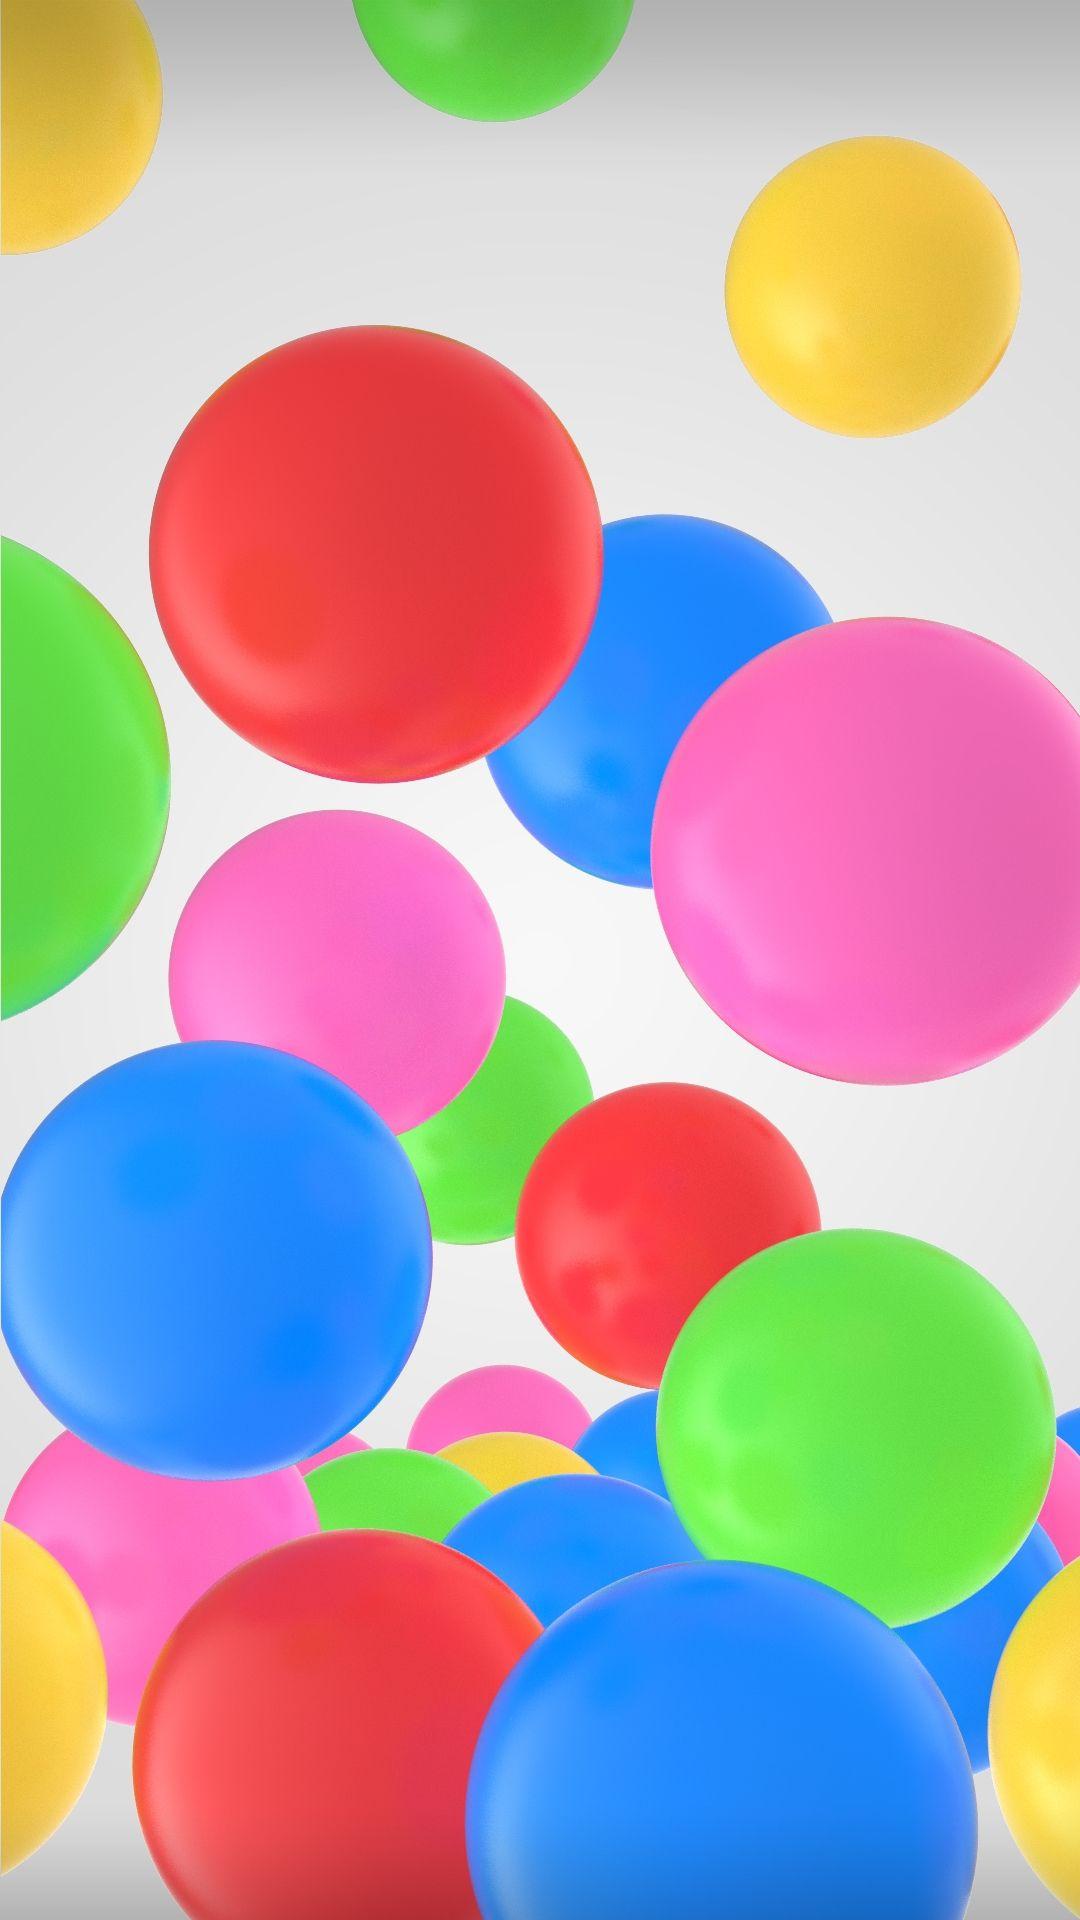 Samsung Galaxy A8 Wallpaper with Cool Colorful Bubbles. Android